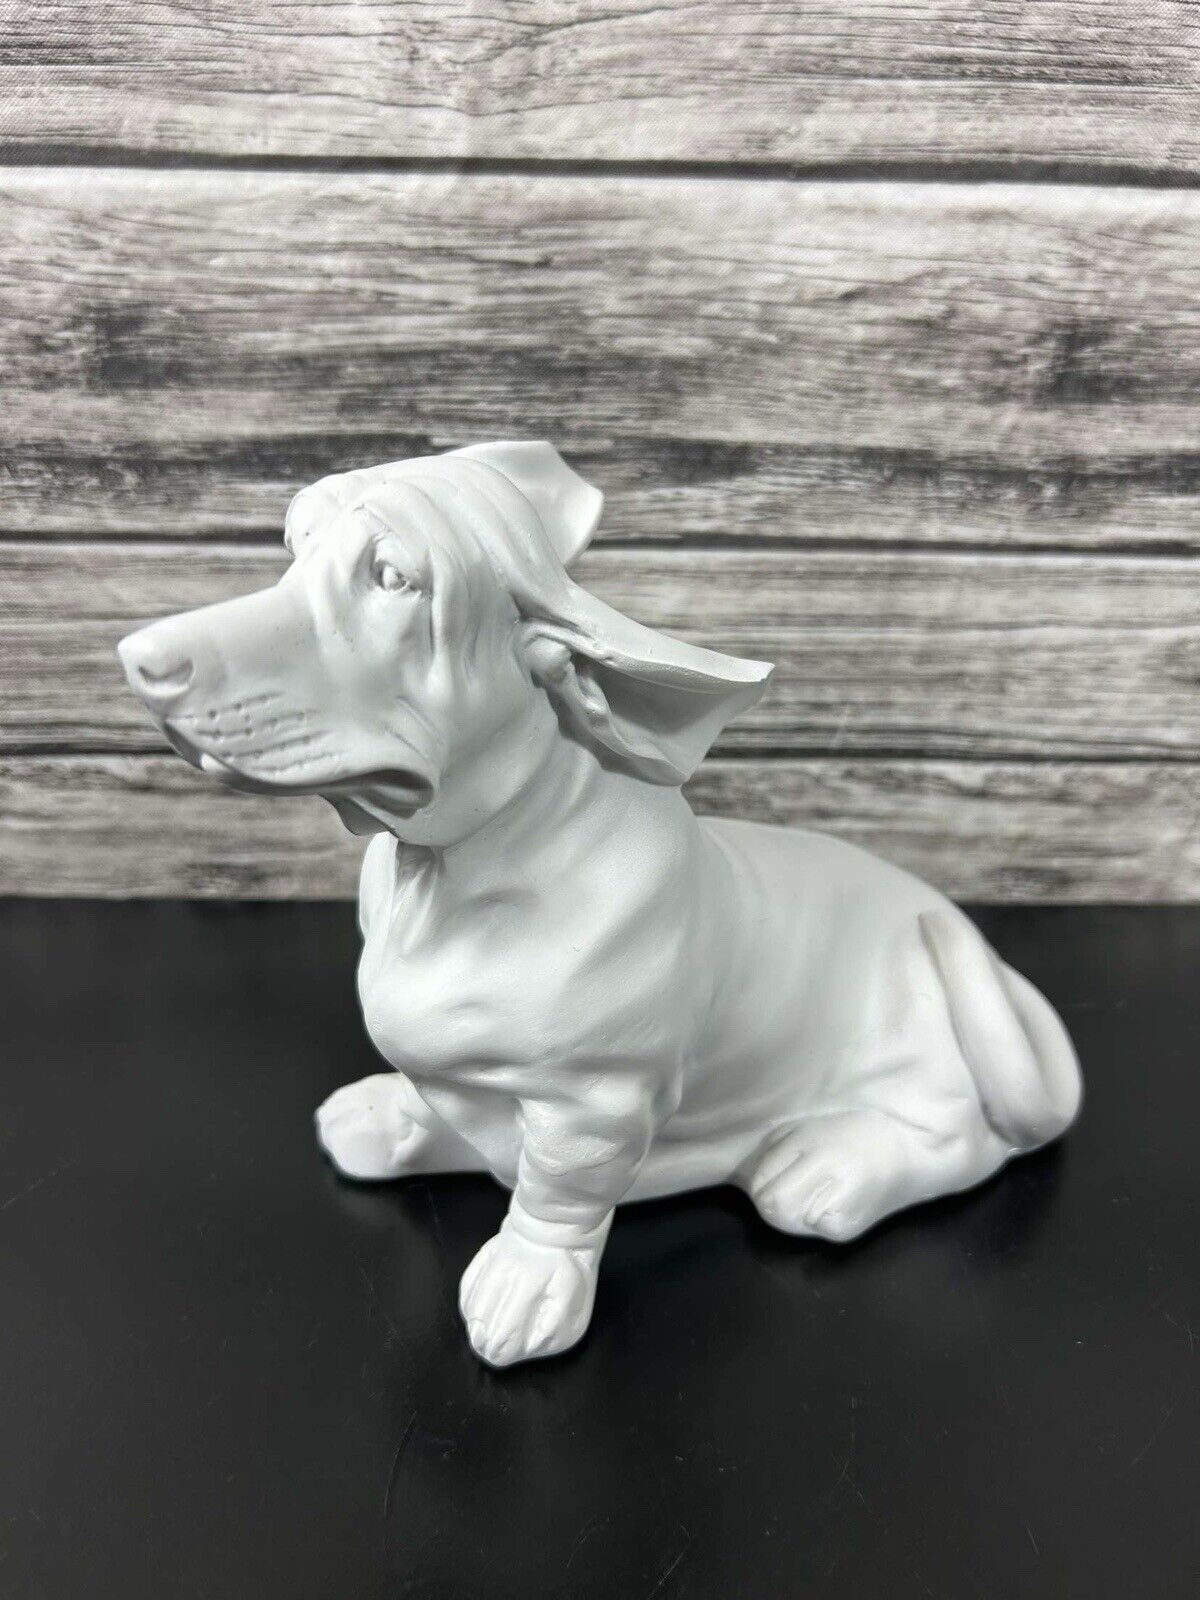 NEW White Basset Hound Statue Figurine with Flowing Ears